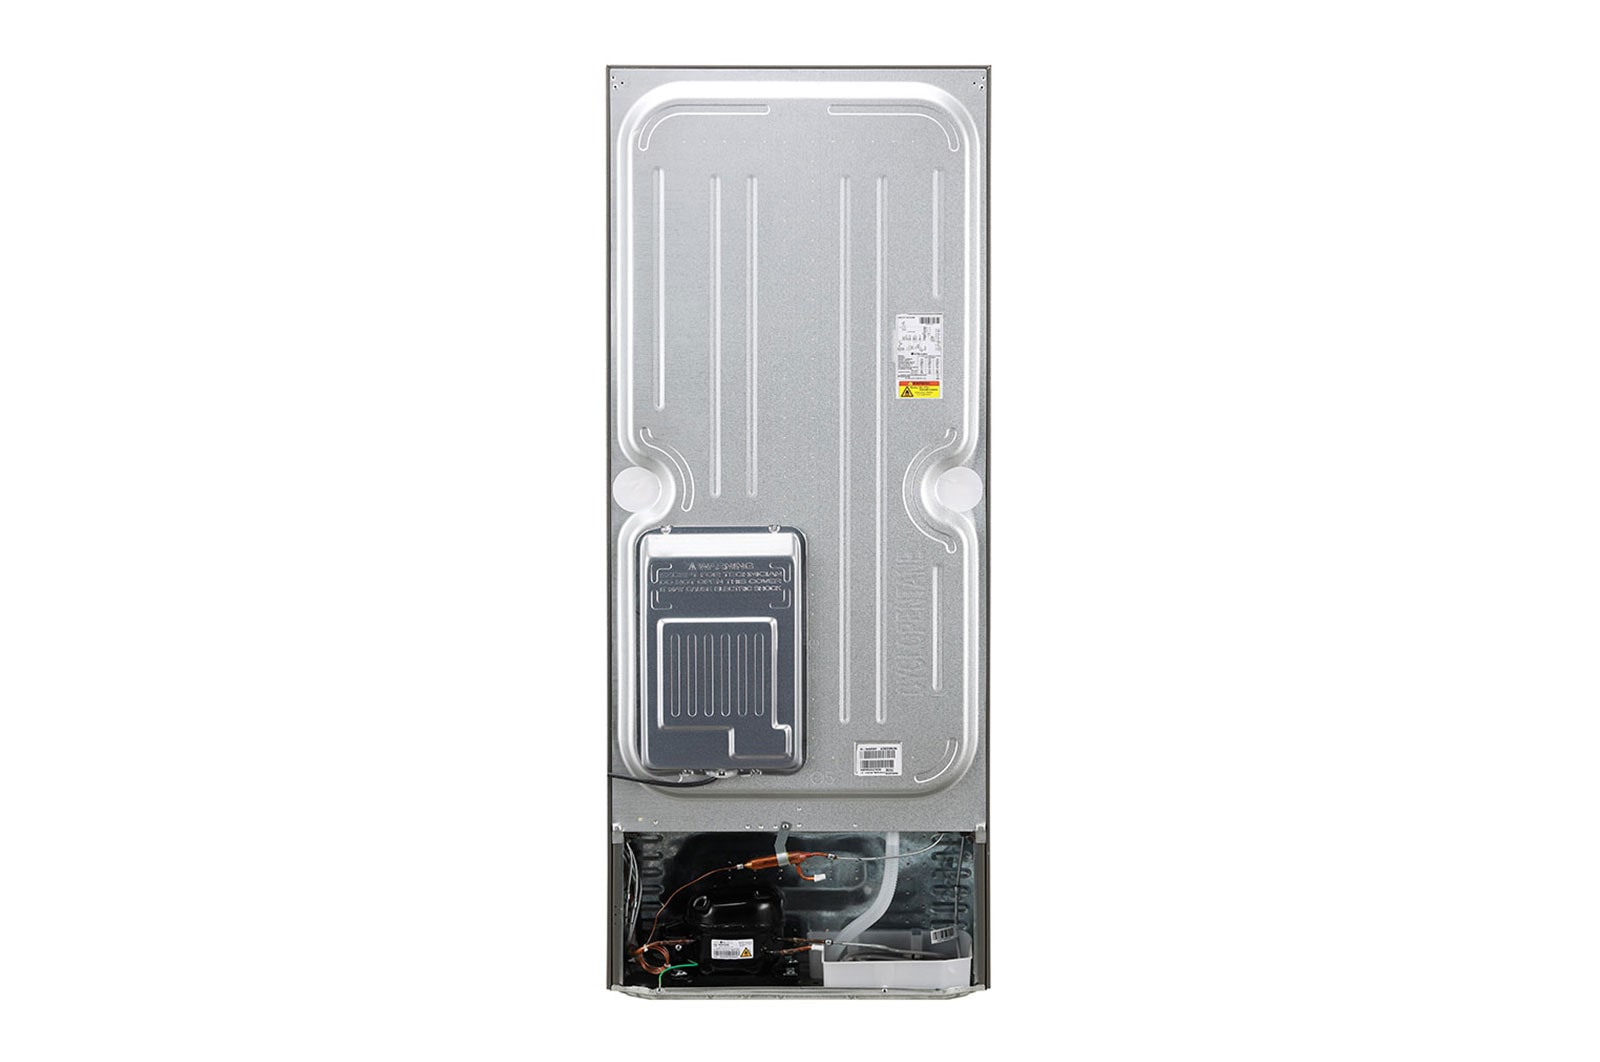 LG 260 L Frost Free refrigerator with Smart Inverter Compressor in Dazzle Steel Color GL-S292RDSY